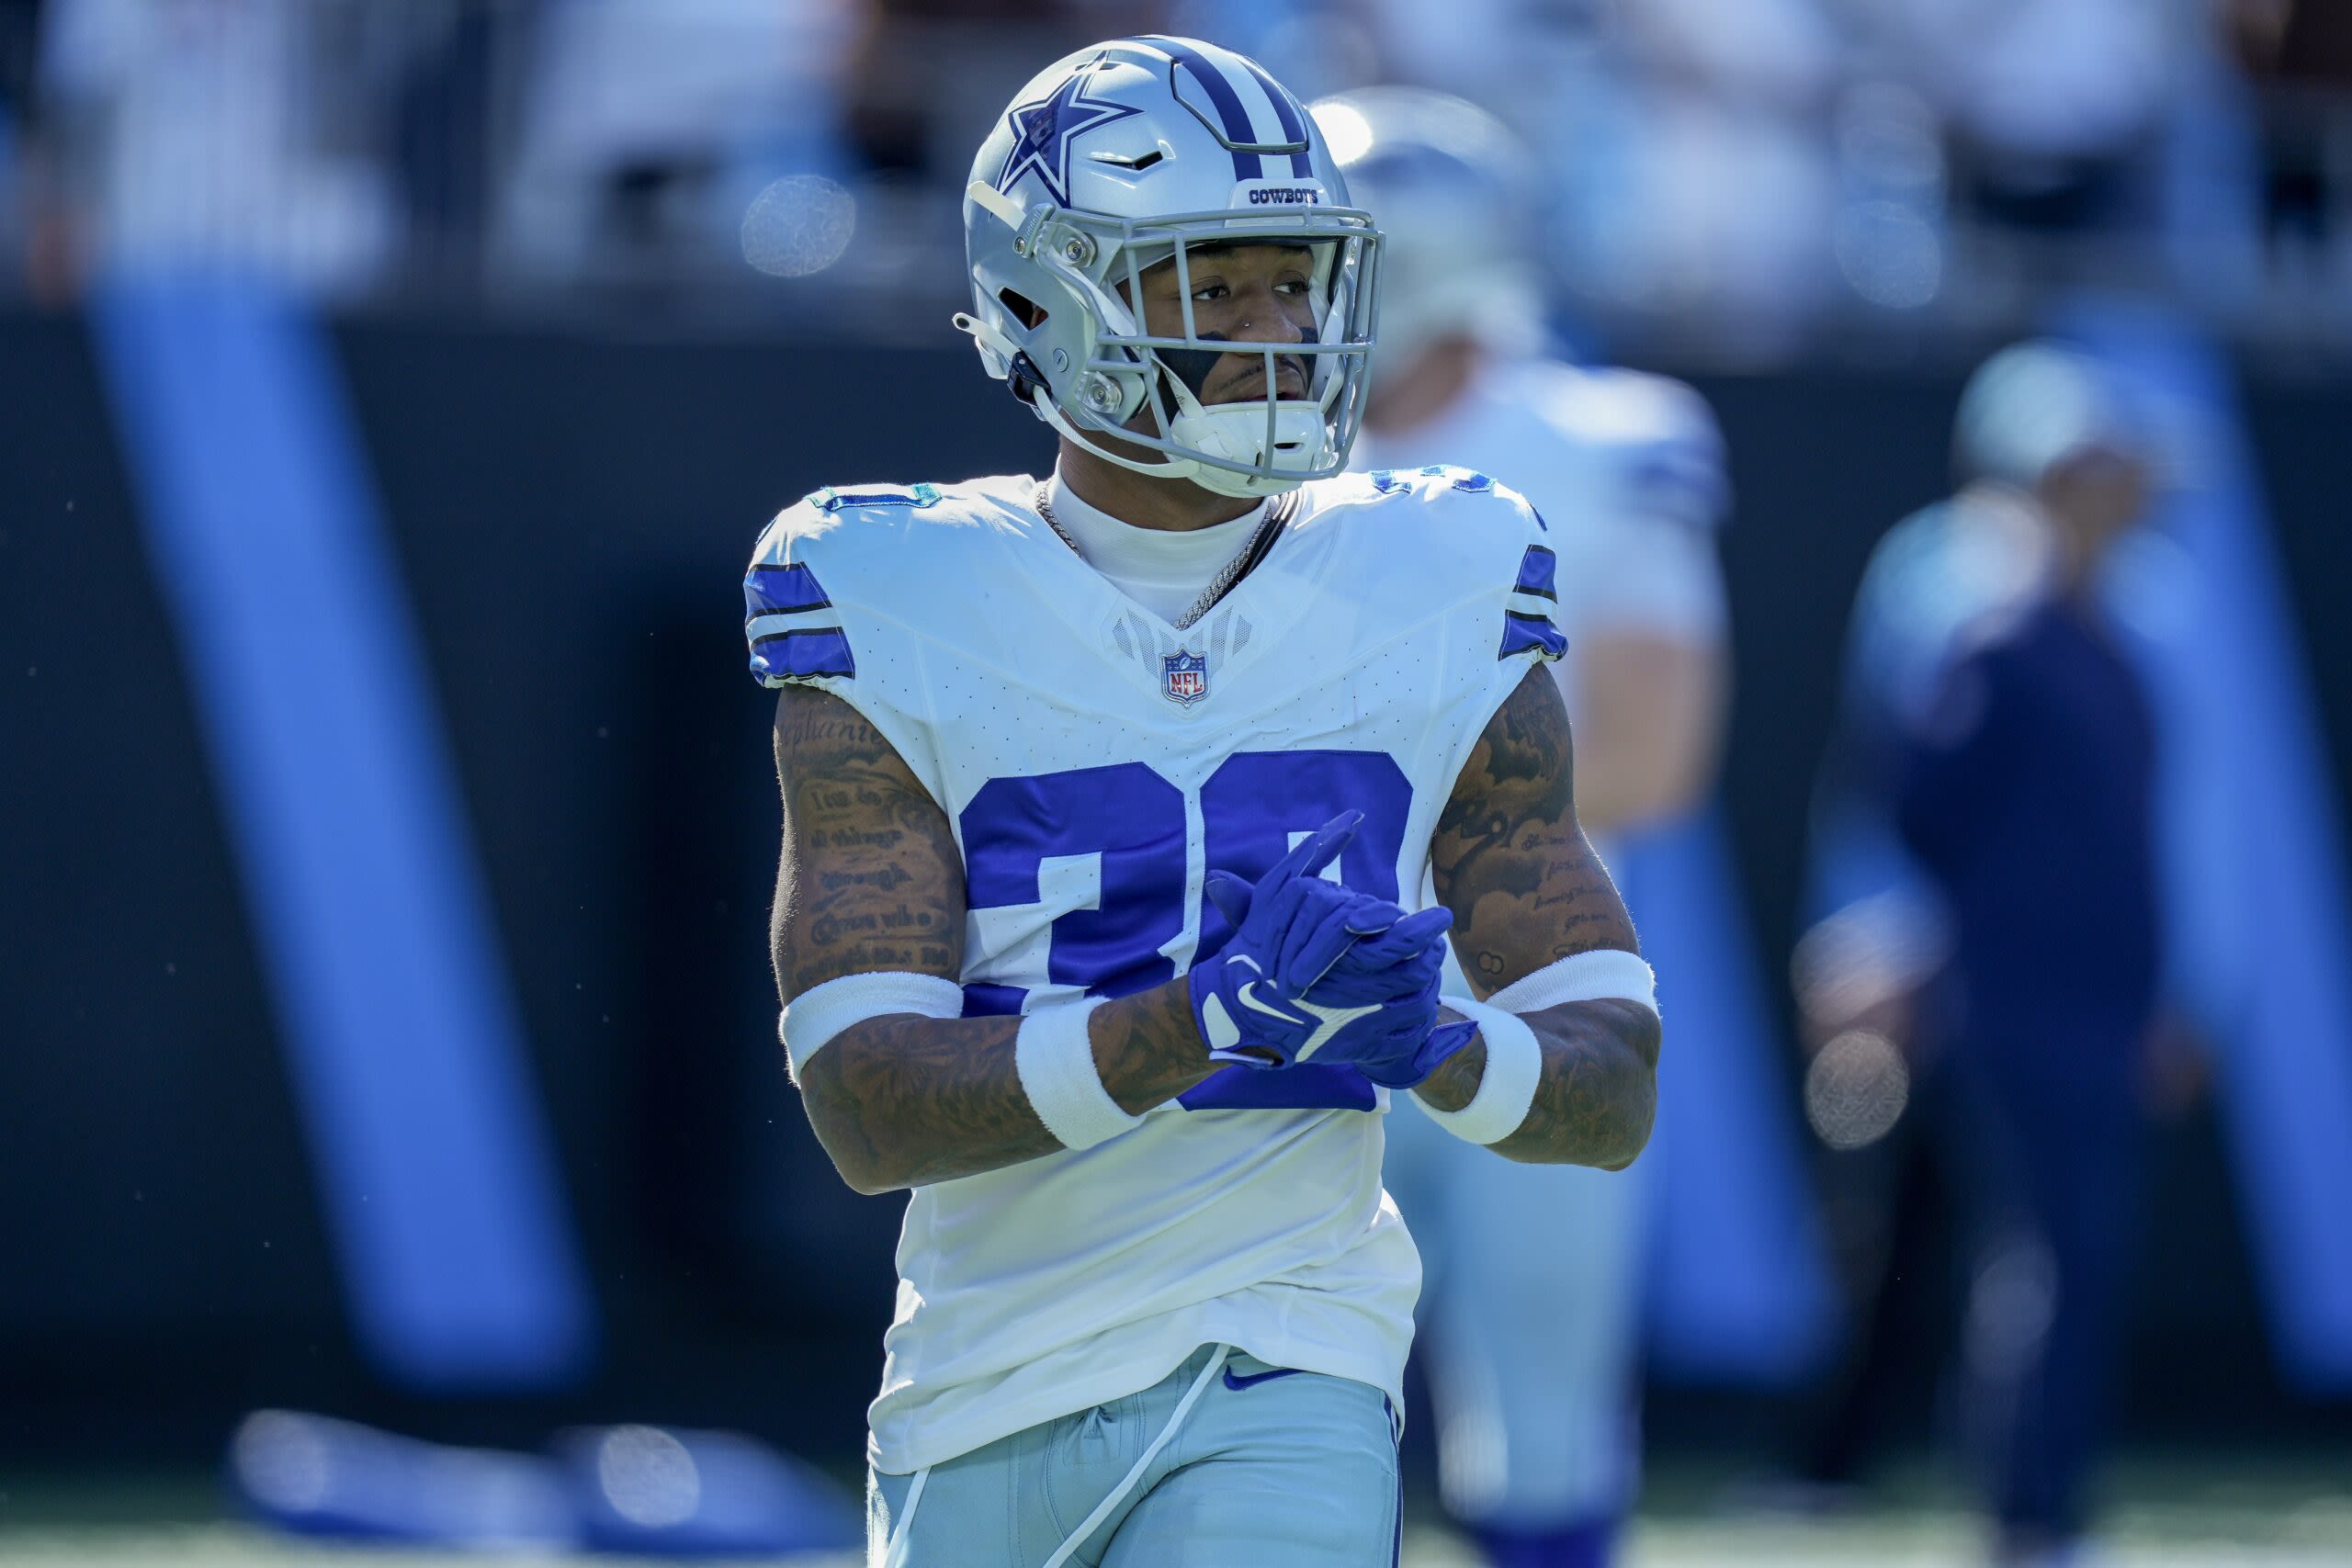 ‘It’s going to get pretty dark’: Cowboys safety Juanyeh Thomas has advice for this year’s UDFAs